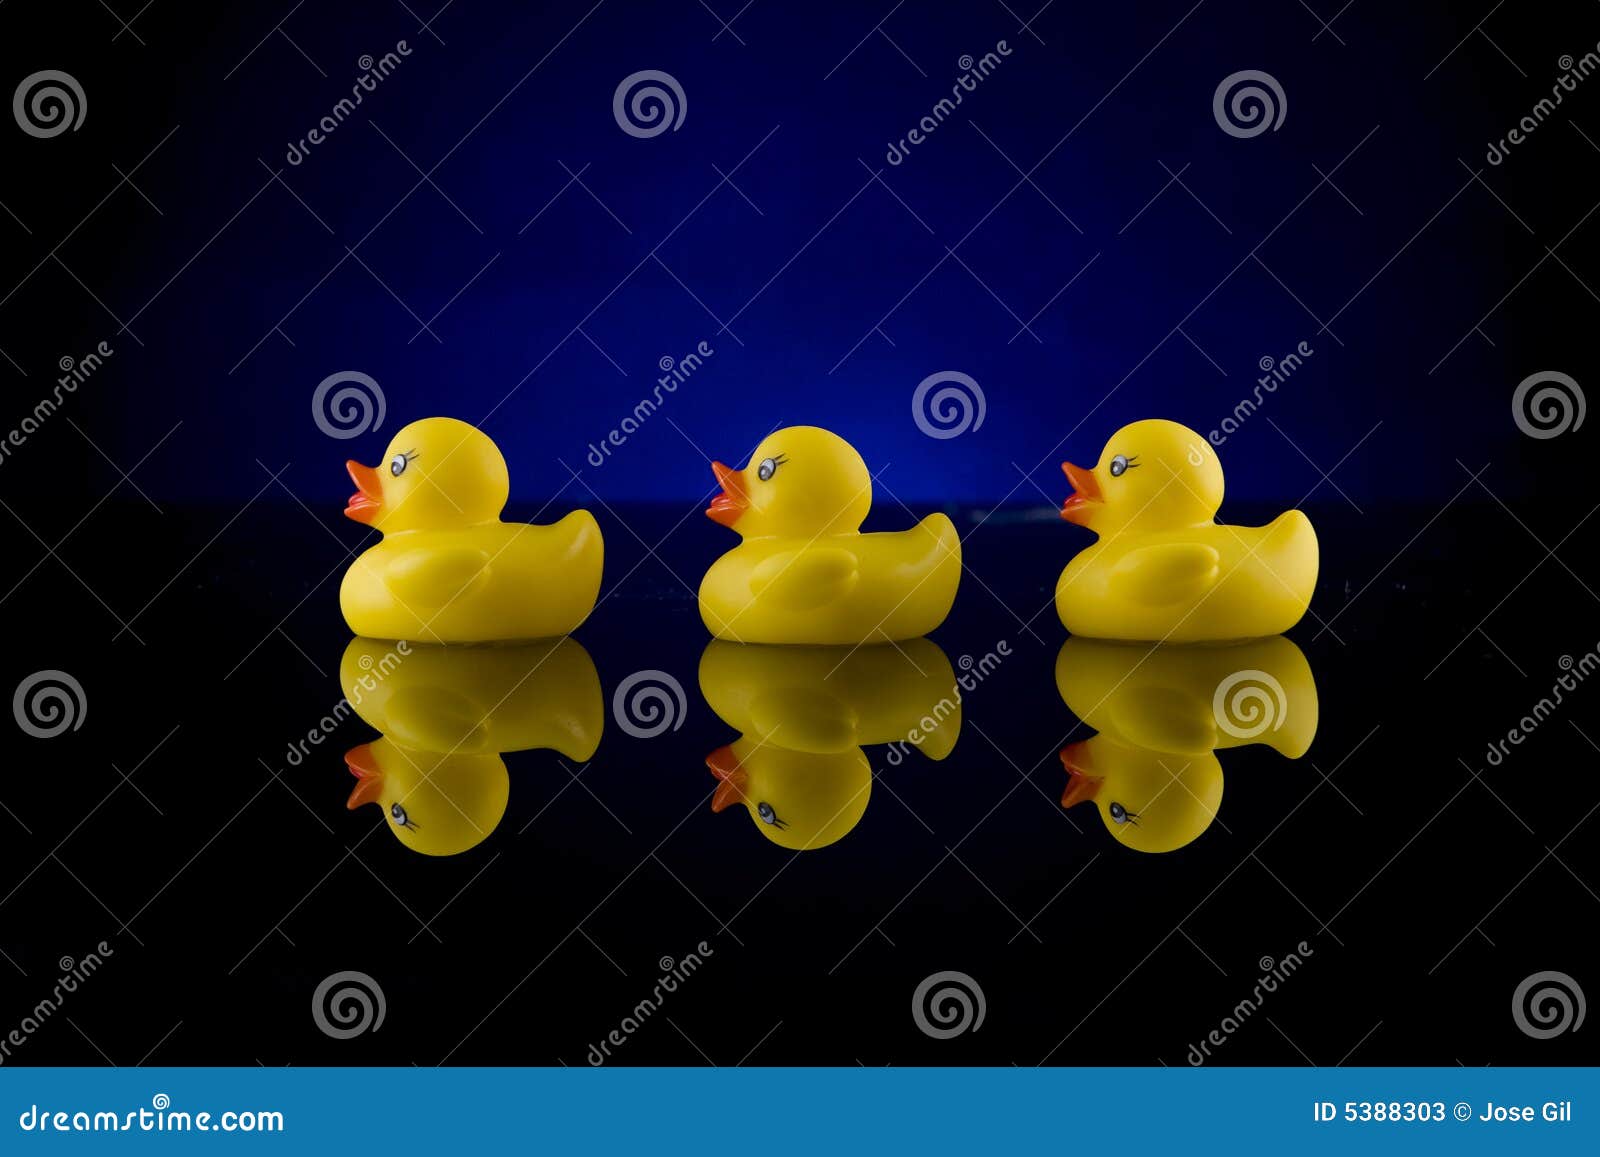 rubber duck row with reflection 2